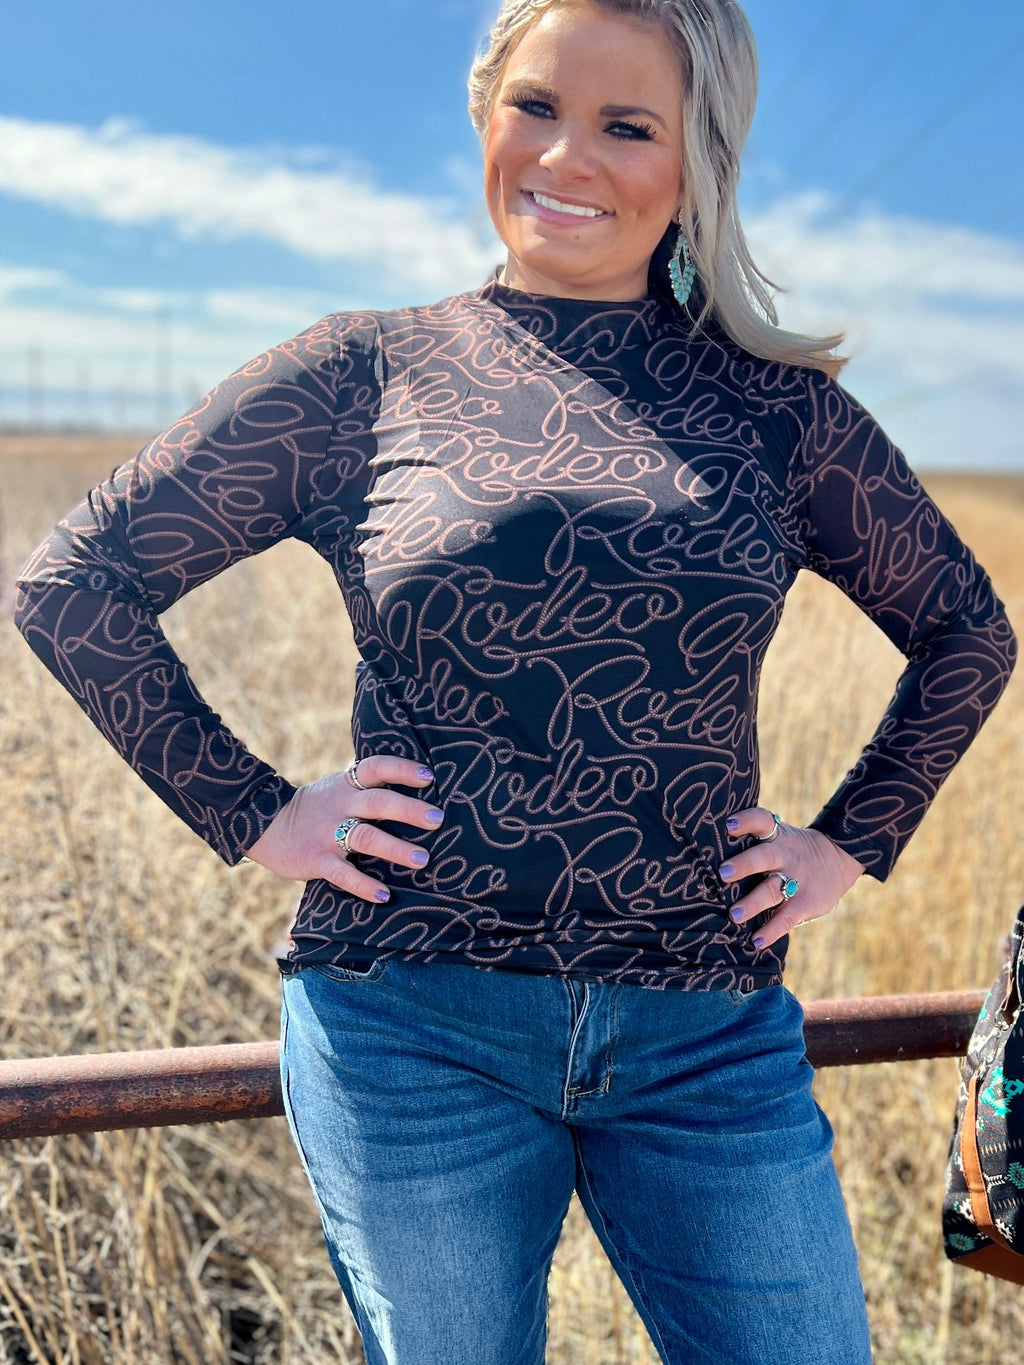 Sterling Kreek Rodeo Queen Top. Western style sheer top. Western style mesh top. Rodeo top. Rodeo mesh top. Rodeo sheer top. Women's sheer tops. Layering tops. Western fashion. Fashion Trends 2024. Black mesh top. Black sheer top. Western outfit. Rodeo outfit. Western boutique. Small business. Woman Owned.